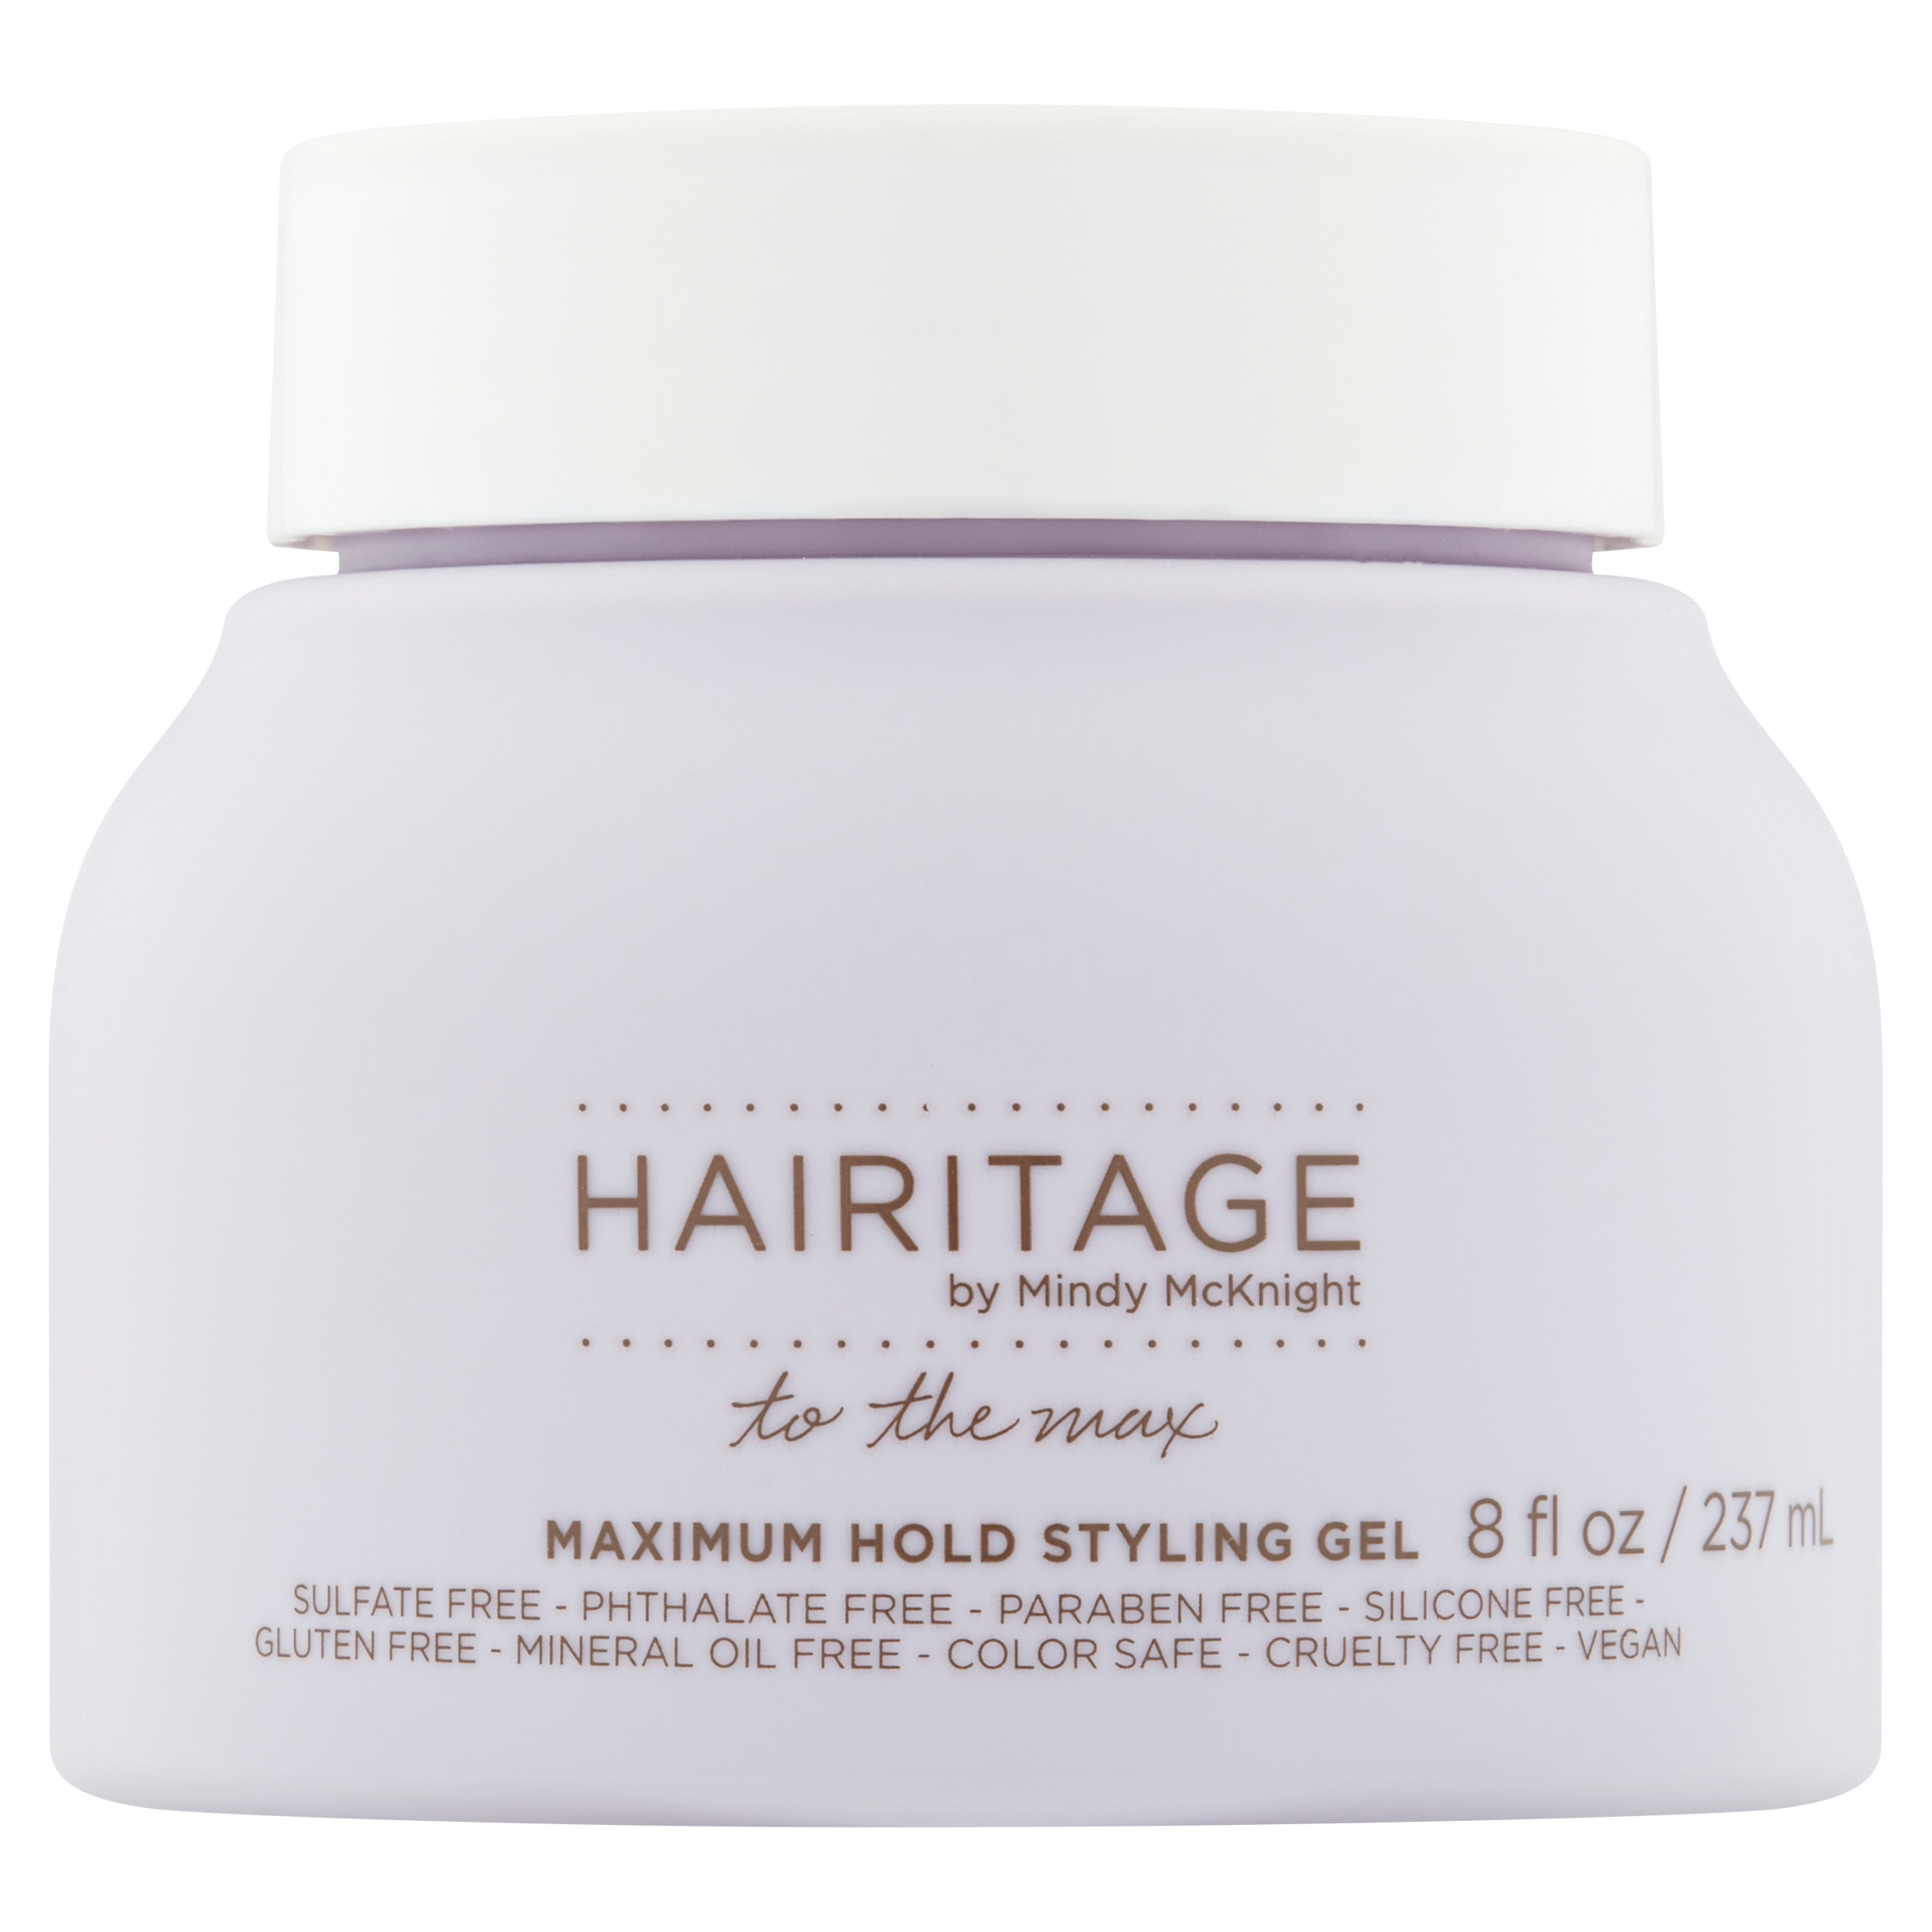 Hairitage To The Max - Maximum Hold Styling Gel - image 1 of 7